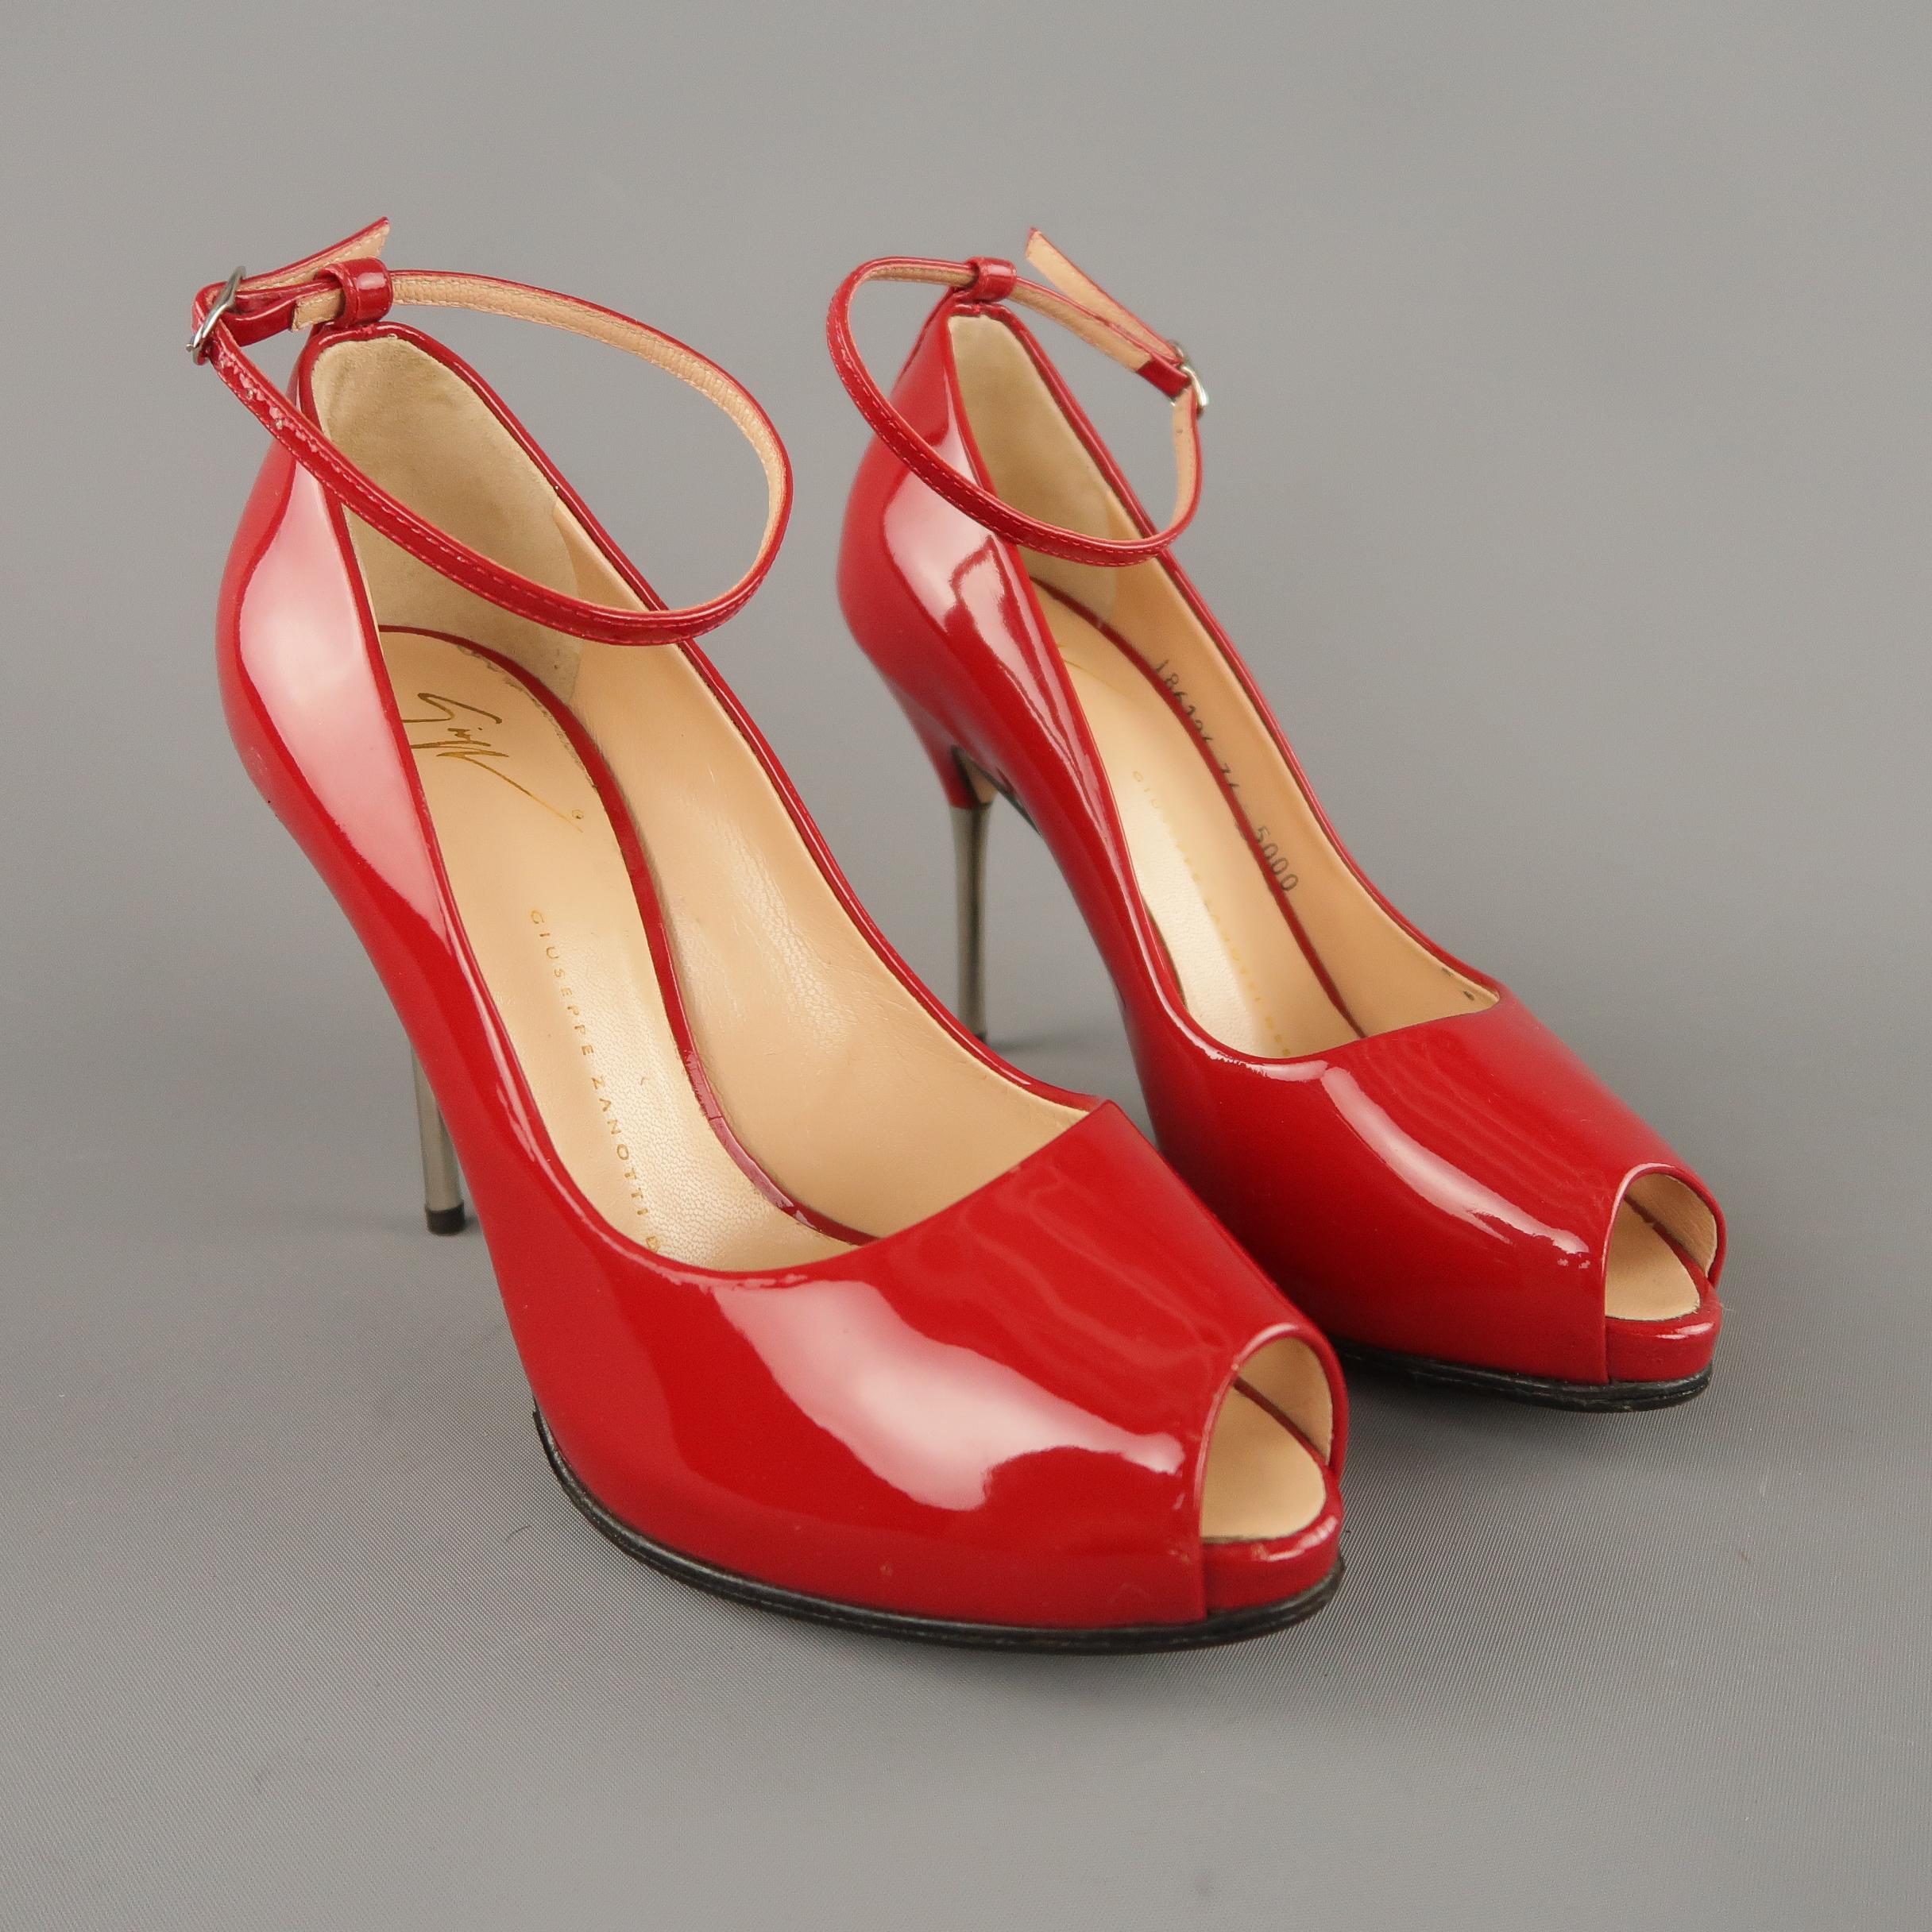 GIUSEPPE ZANOTTI pumps come in red patent leather with a concealed platform peep toe, skinny ankle strap, and silver tone metal spike heel. Made in Italy.

Original retail price $595.00
 
Excellent Pre-Owned Condition.
Marked: IT 36
 
Measurements:
